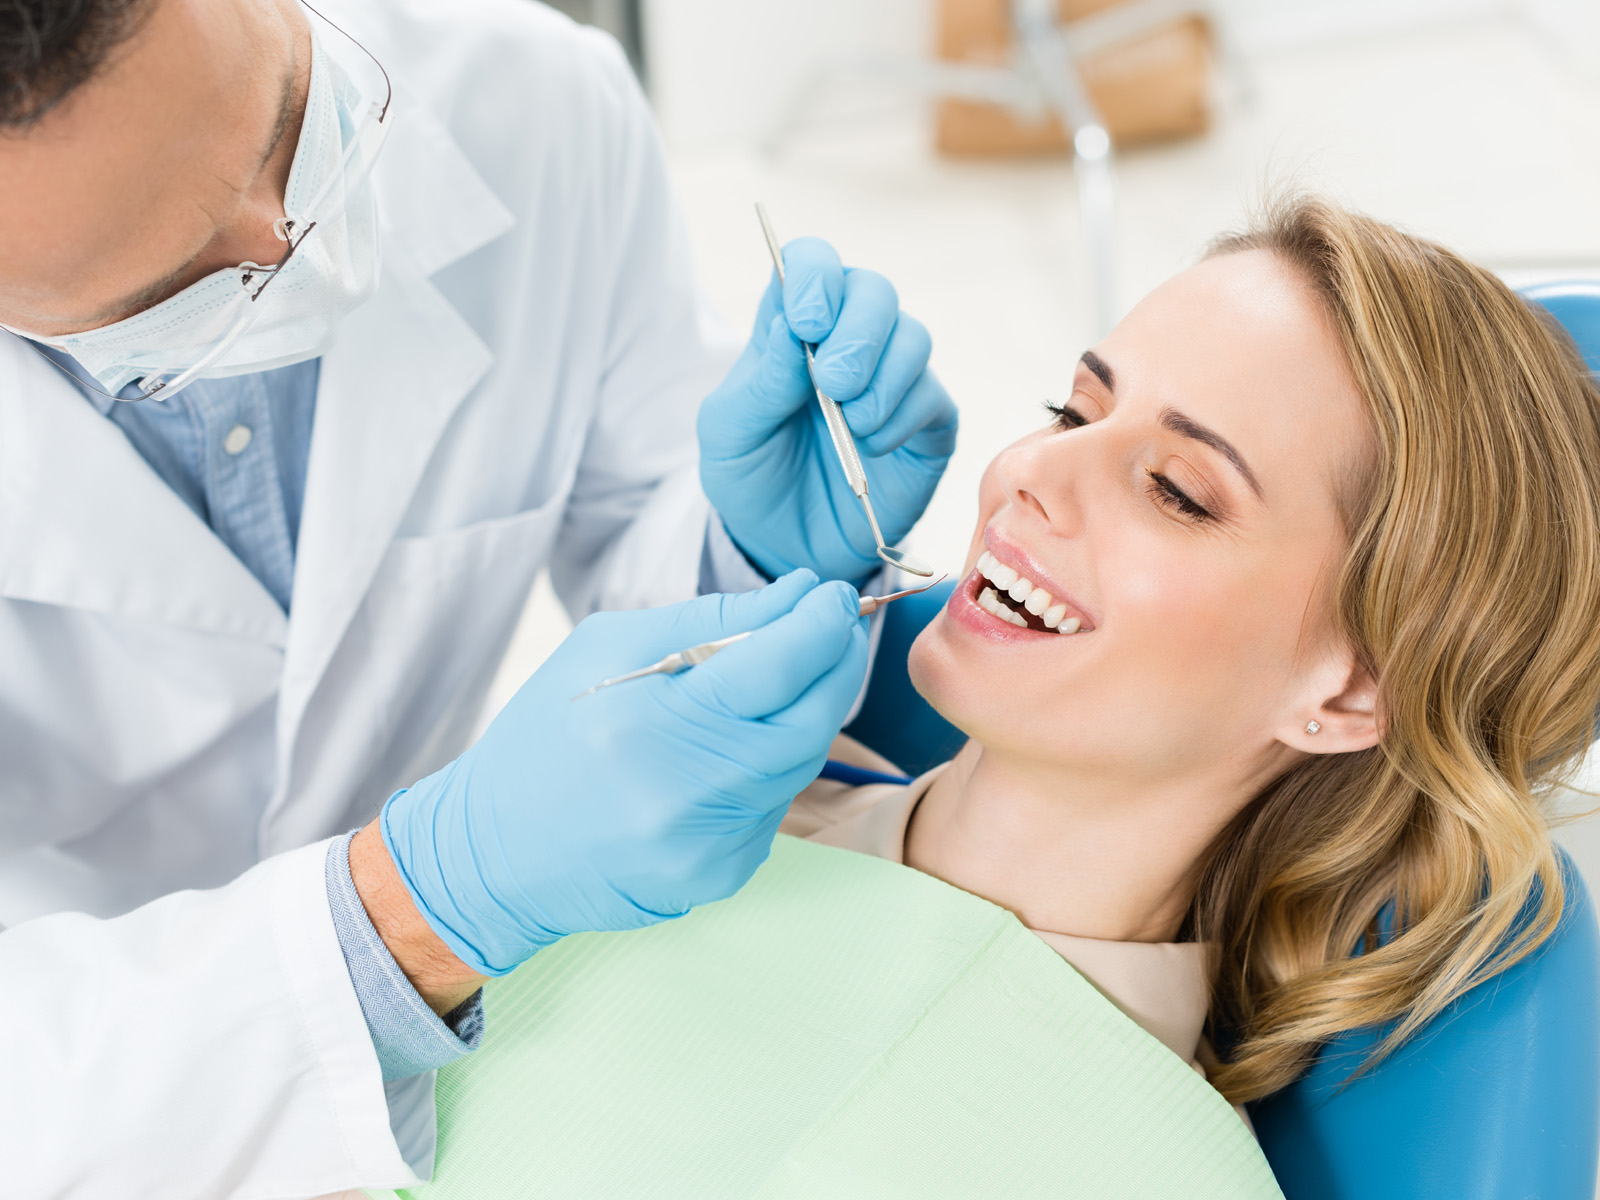 Is it better to have a root canal or extraction?